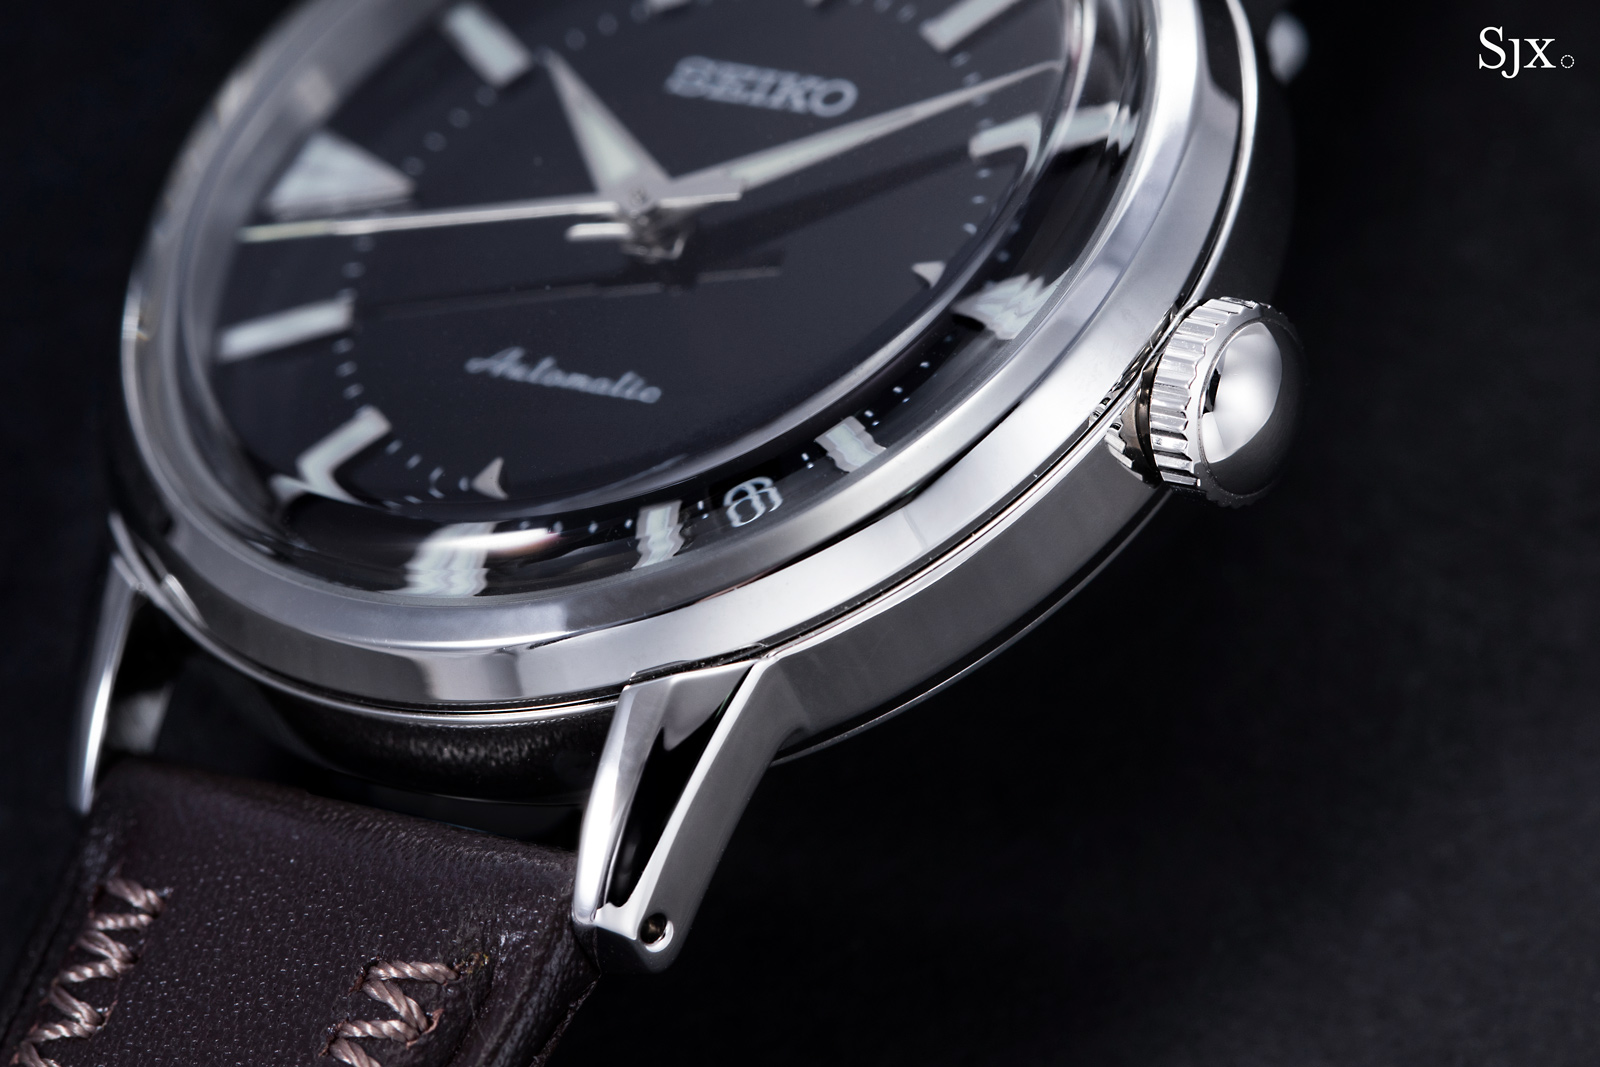 Introducing: The Seiko Prospex 'The 1959 Alpinist Modern Re